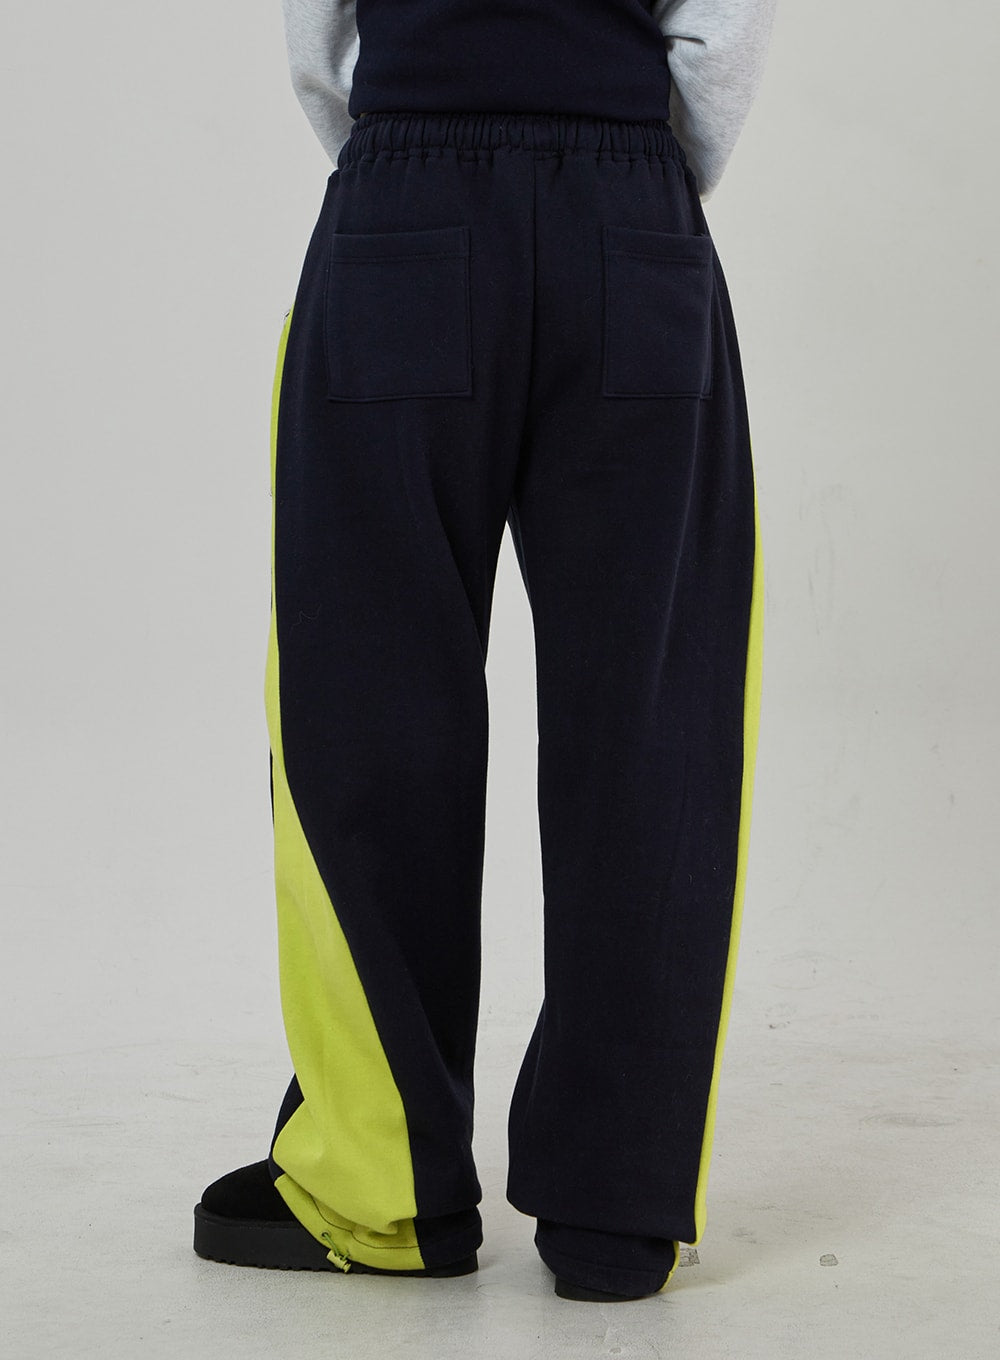 Men's Yellow Cotton Solid Trackpants